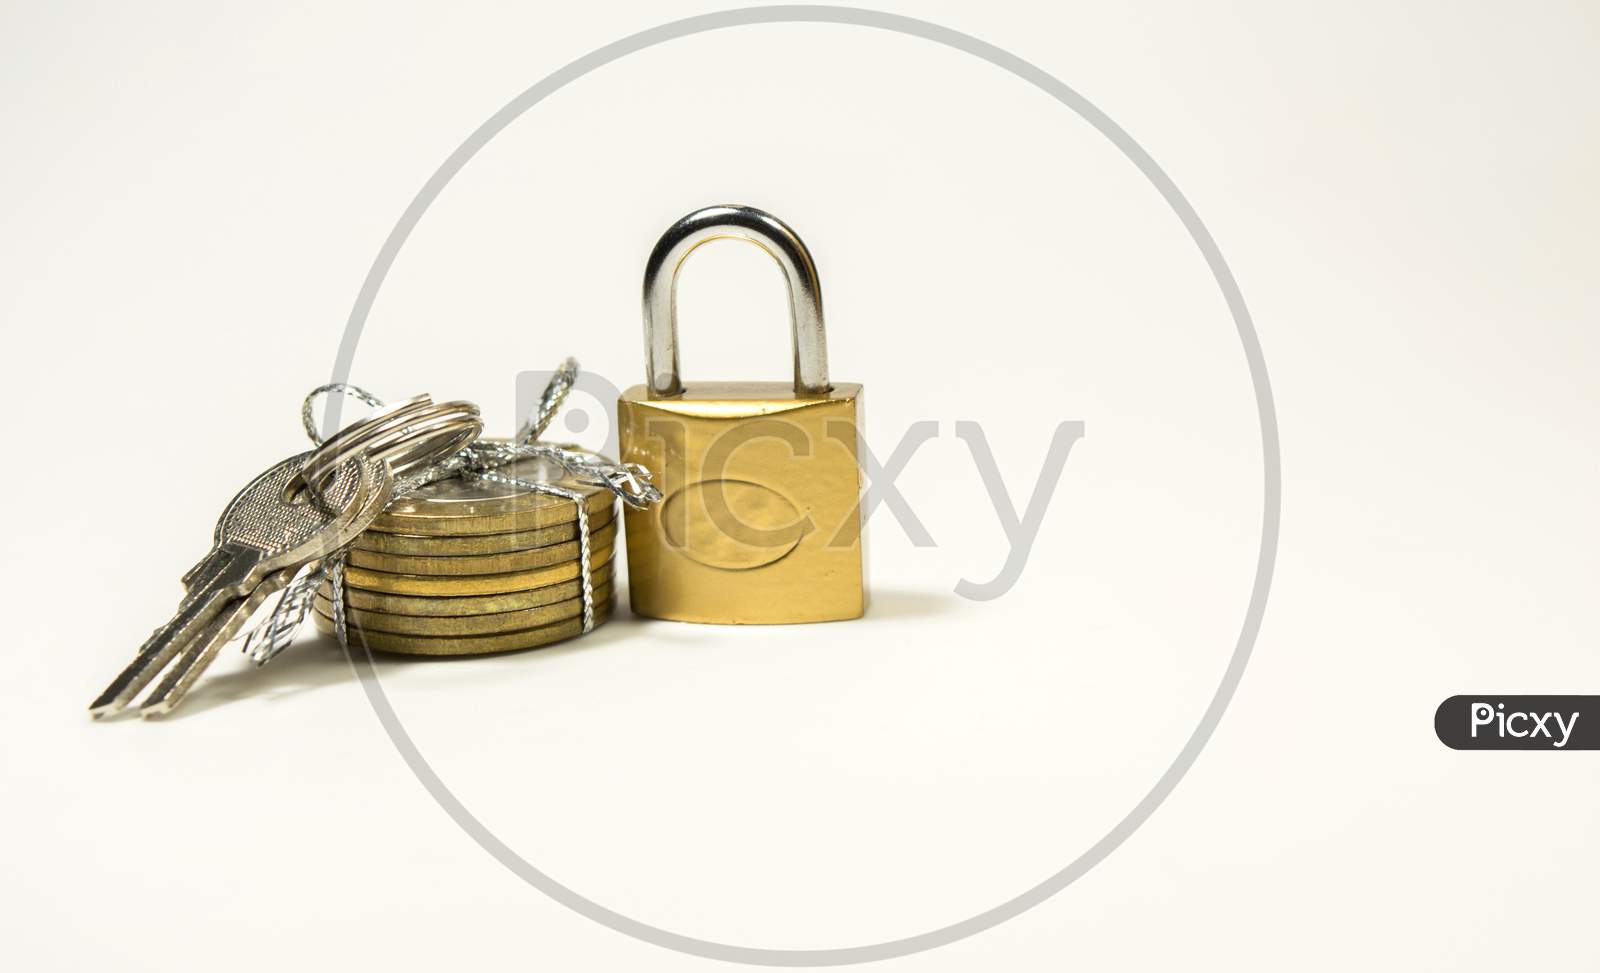 Indian 10 Rupee Coins Tied And Pad Locker With Keys On Isolated White Ackground